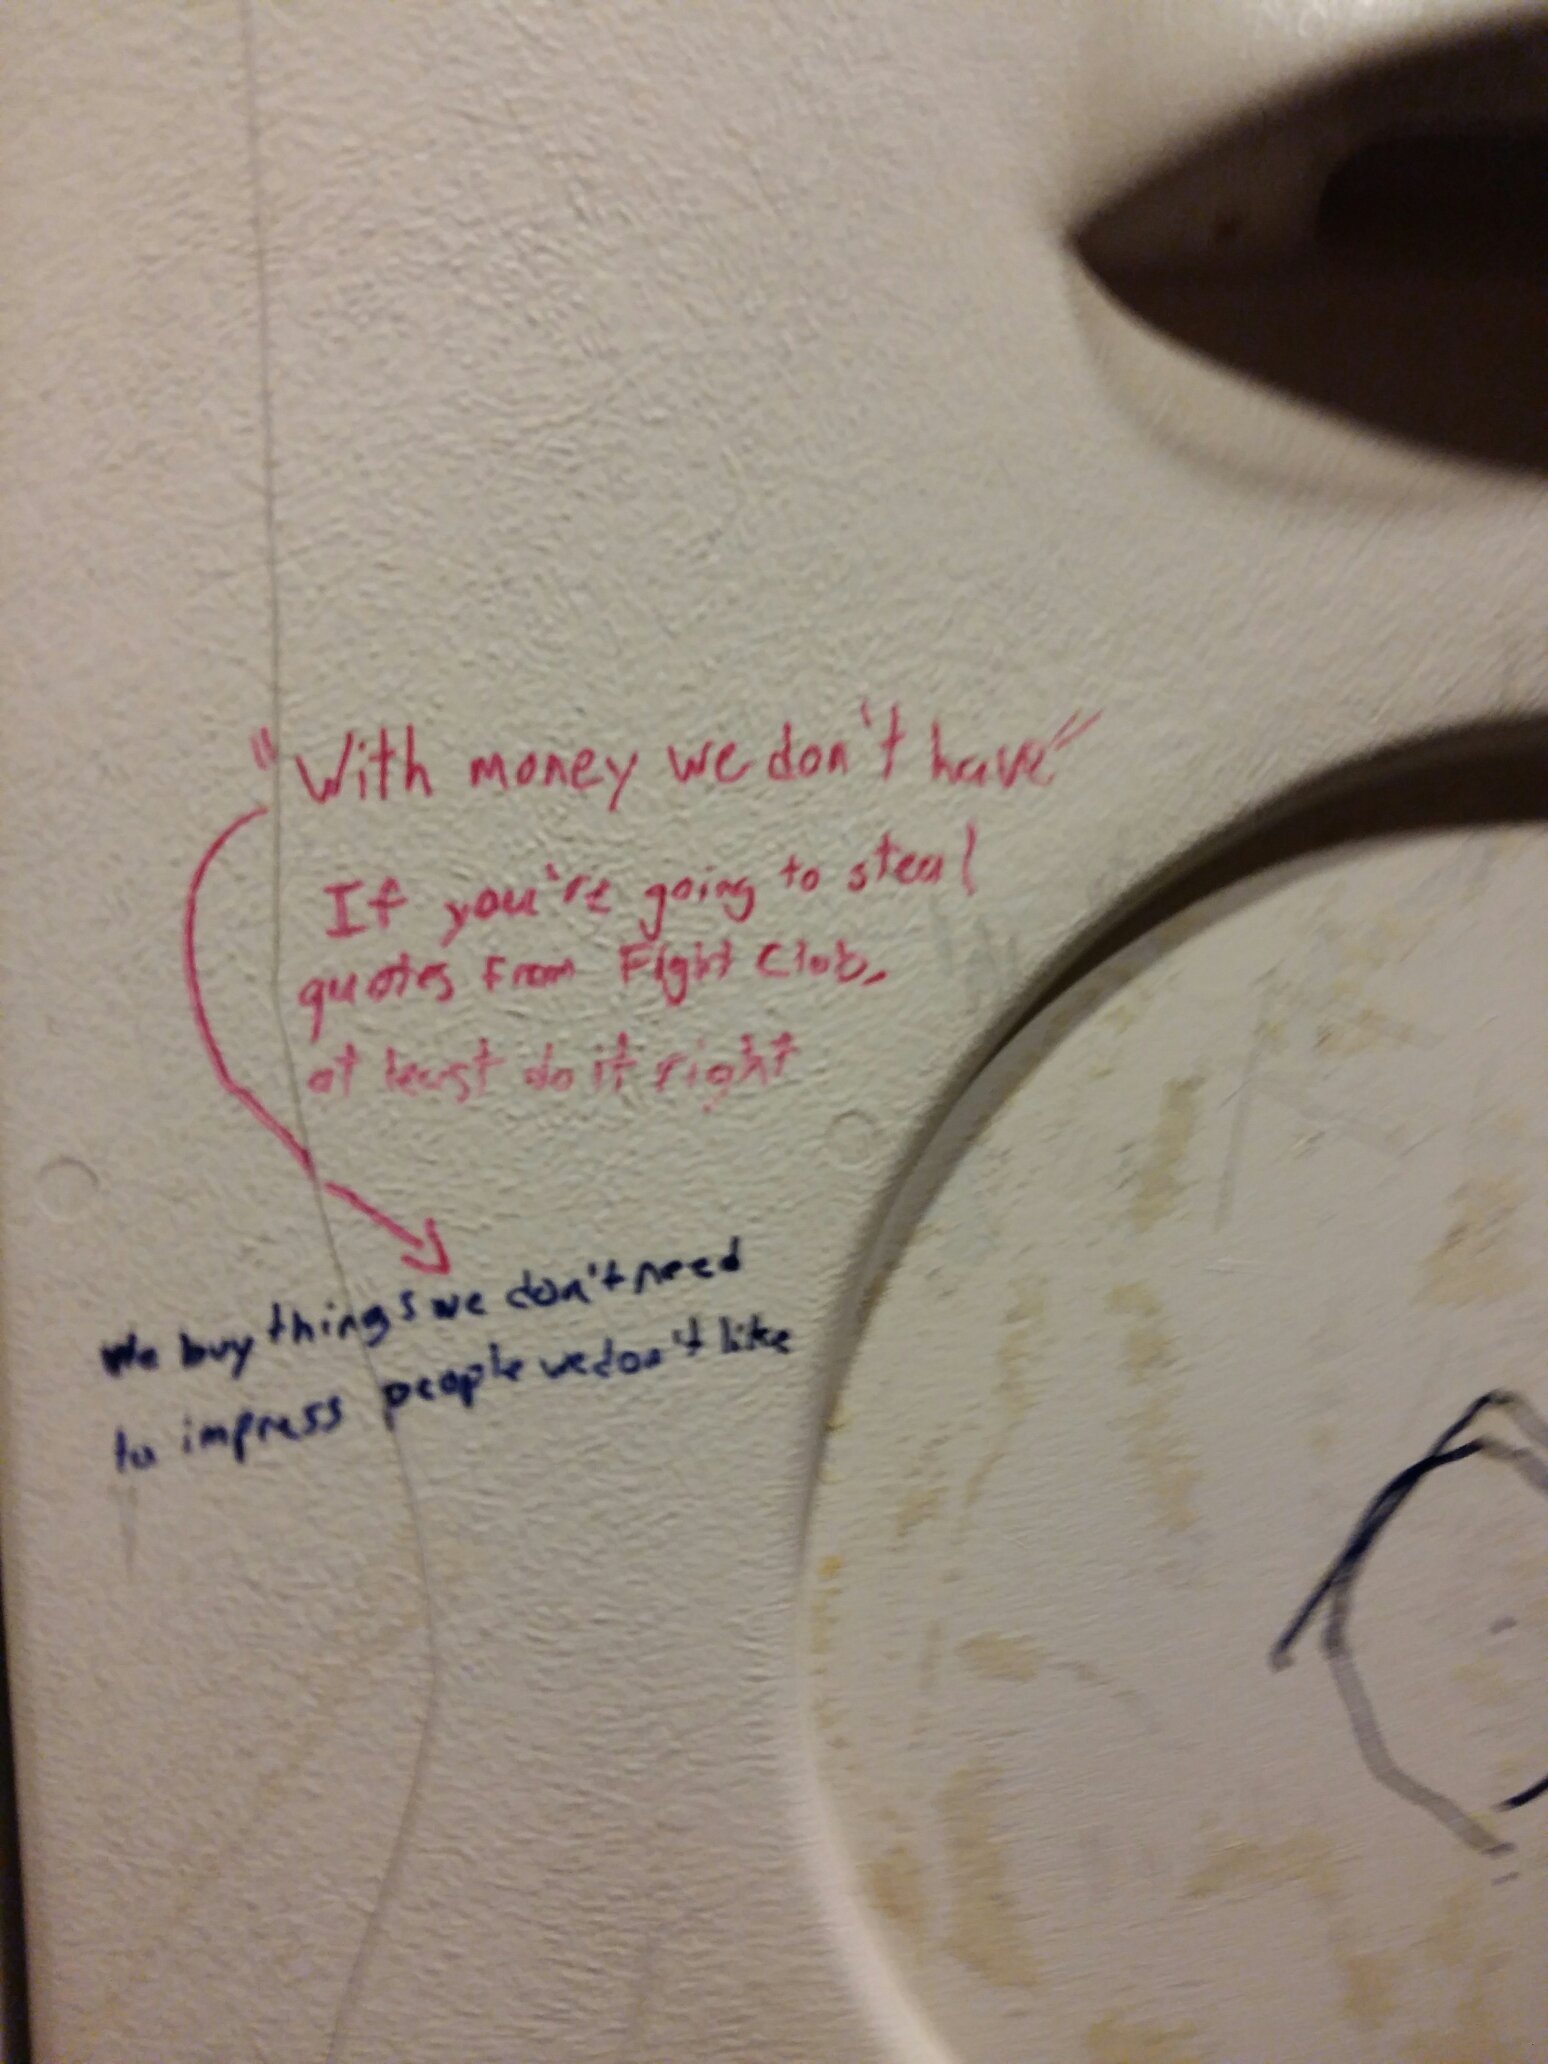 Found this in the washroom at mcd - meme